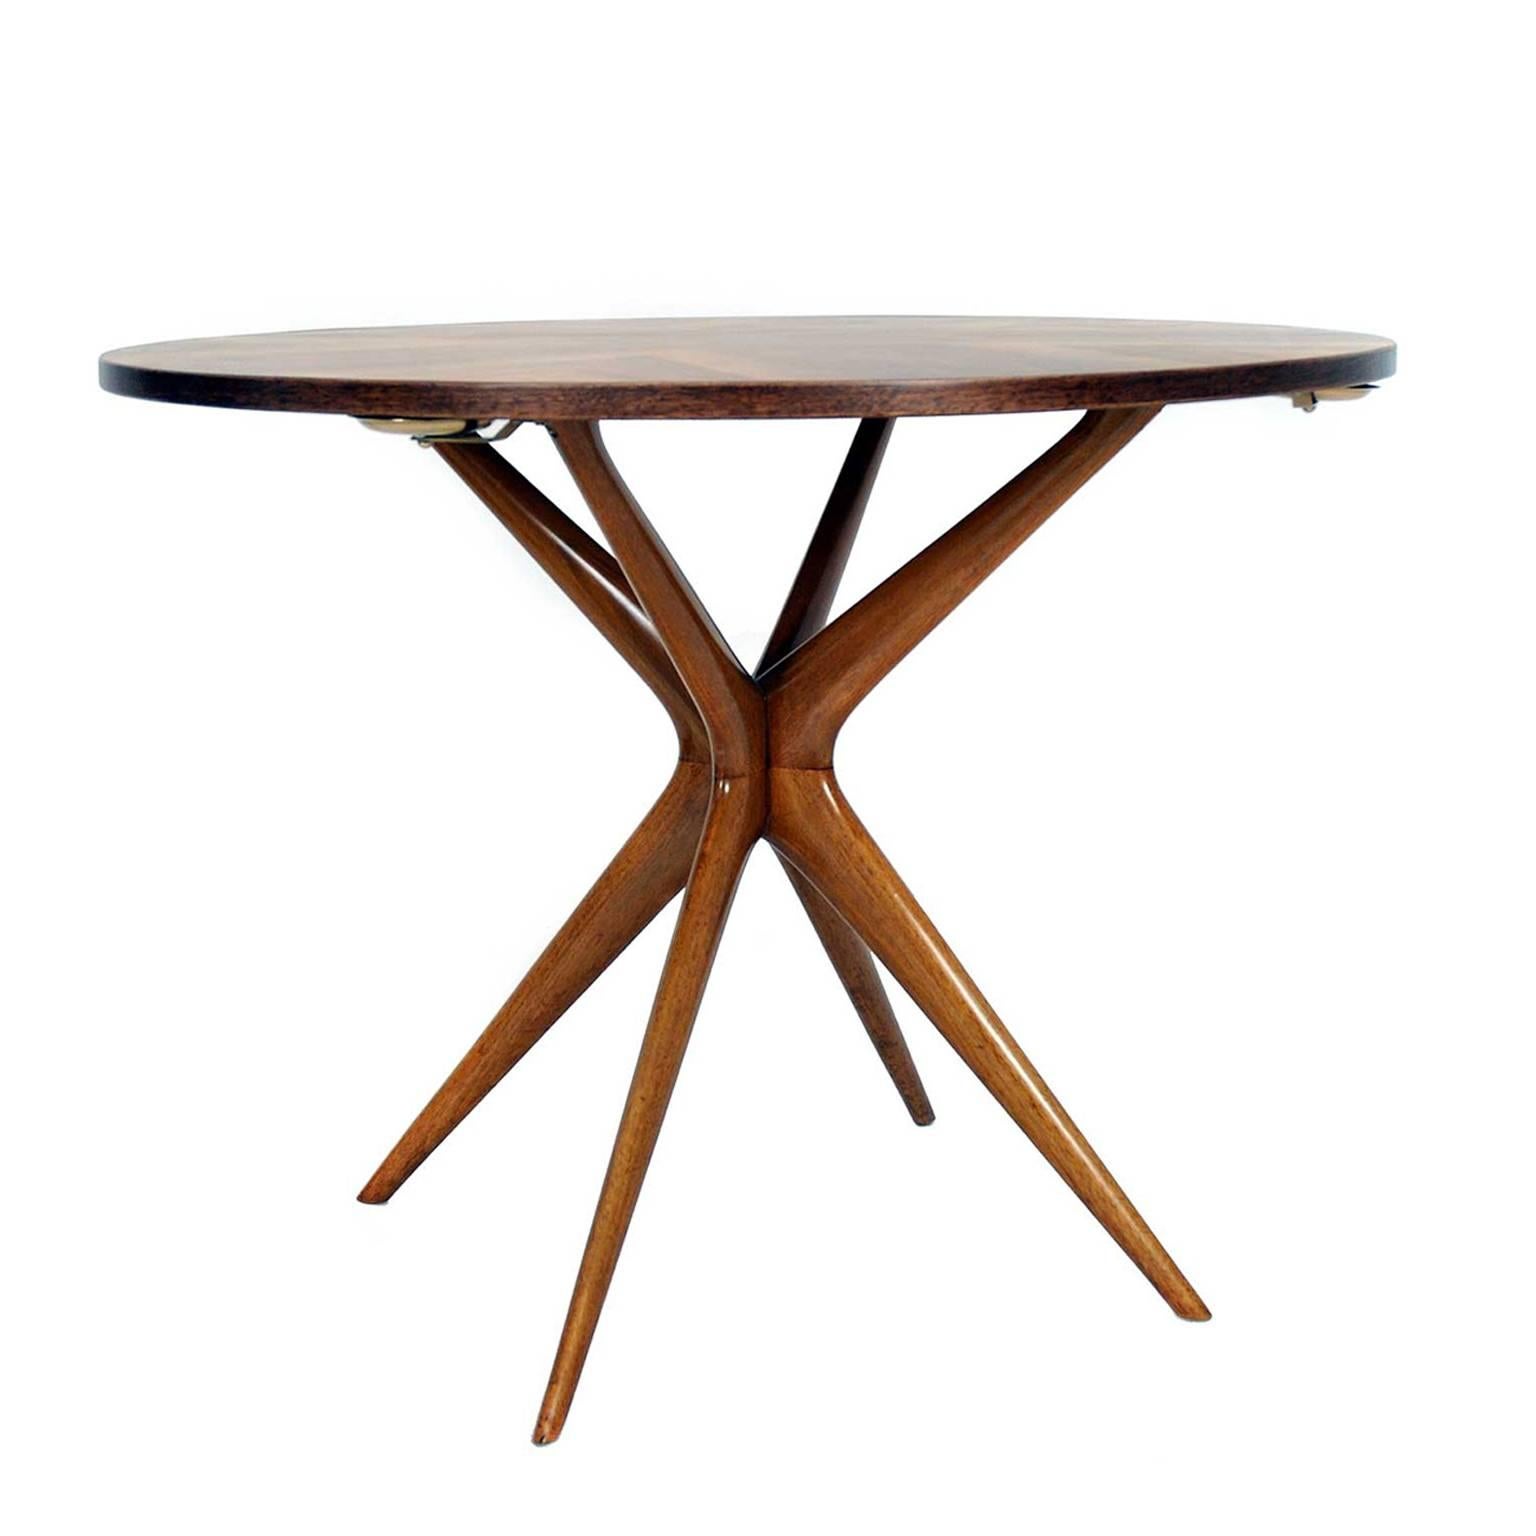 This piece was manufactured in Italy in 1950s. It is made of walnut. The table has five brass plates which can be hide under the tabletop. So it is possible to change the game table into a dining table.